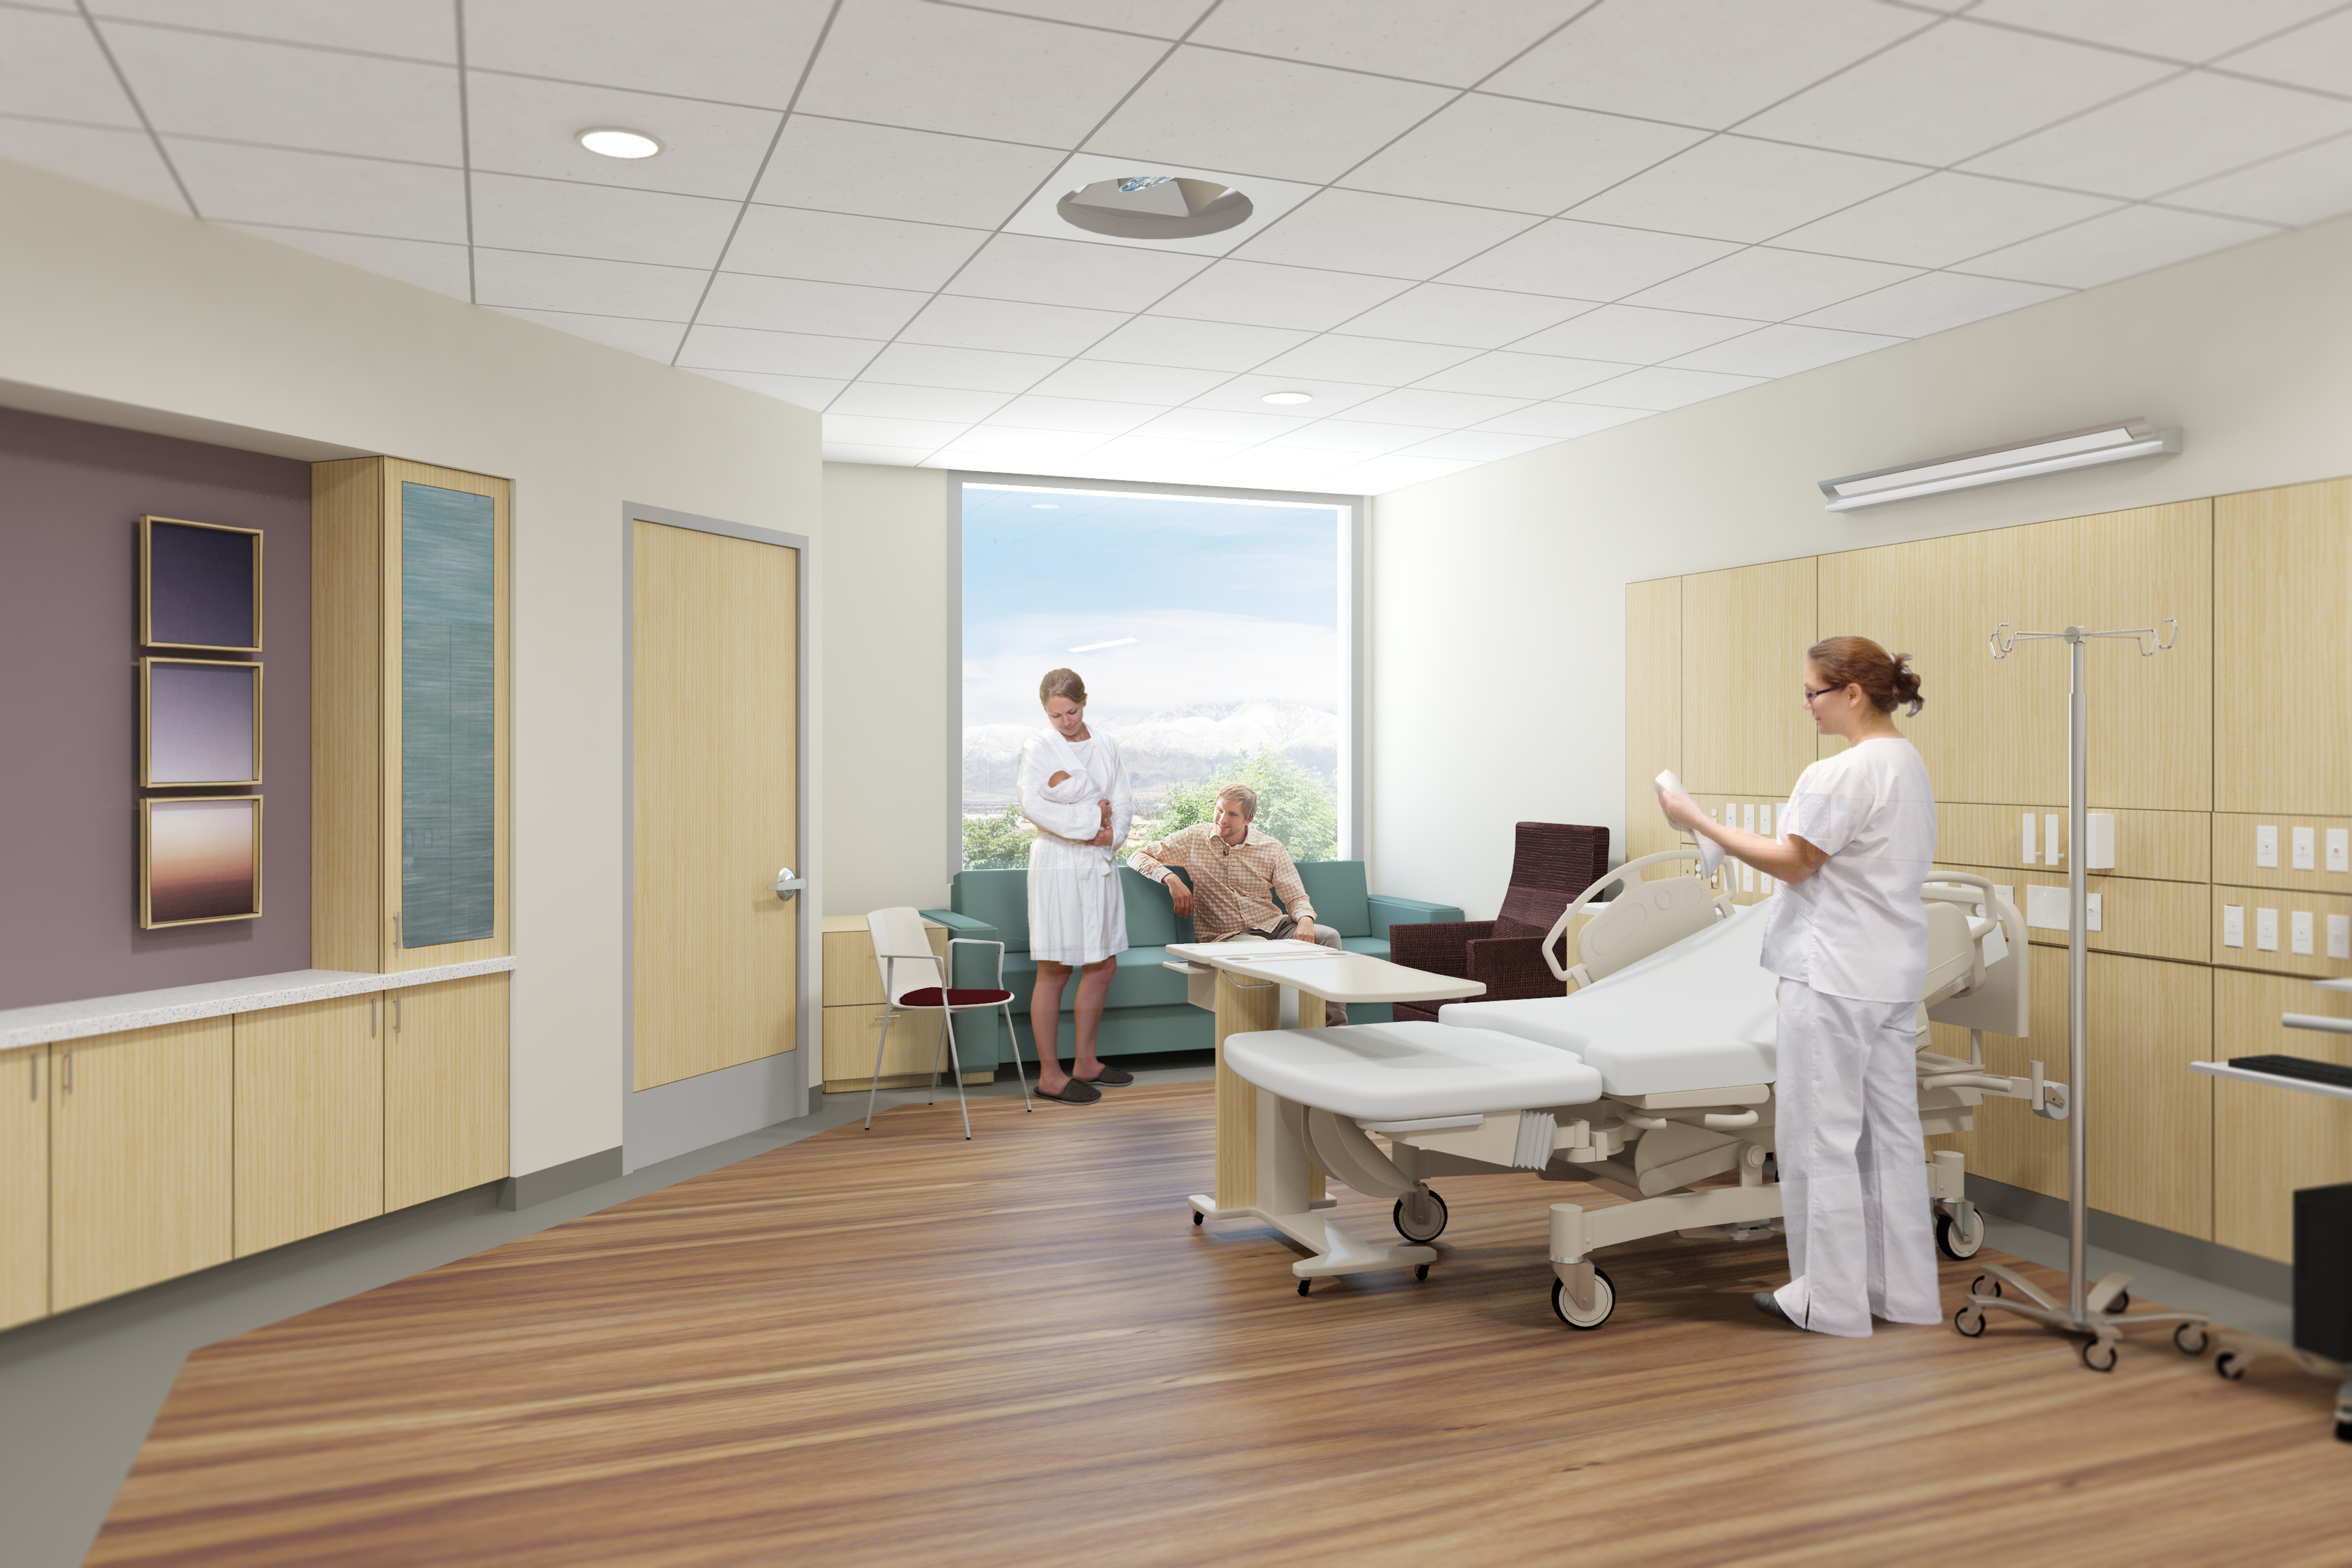 Hospital room design strategies improve patient care in the Henry Mayo Newhall Hospital Patient Tower.